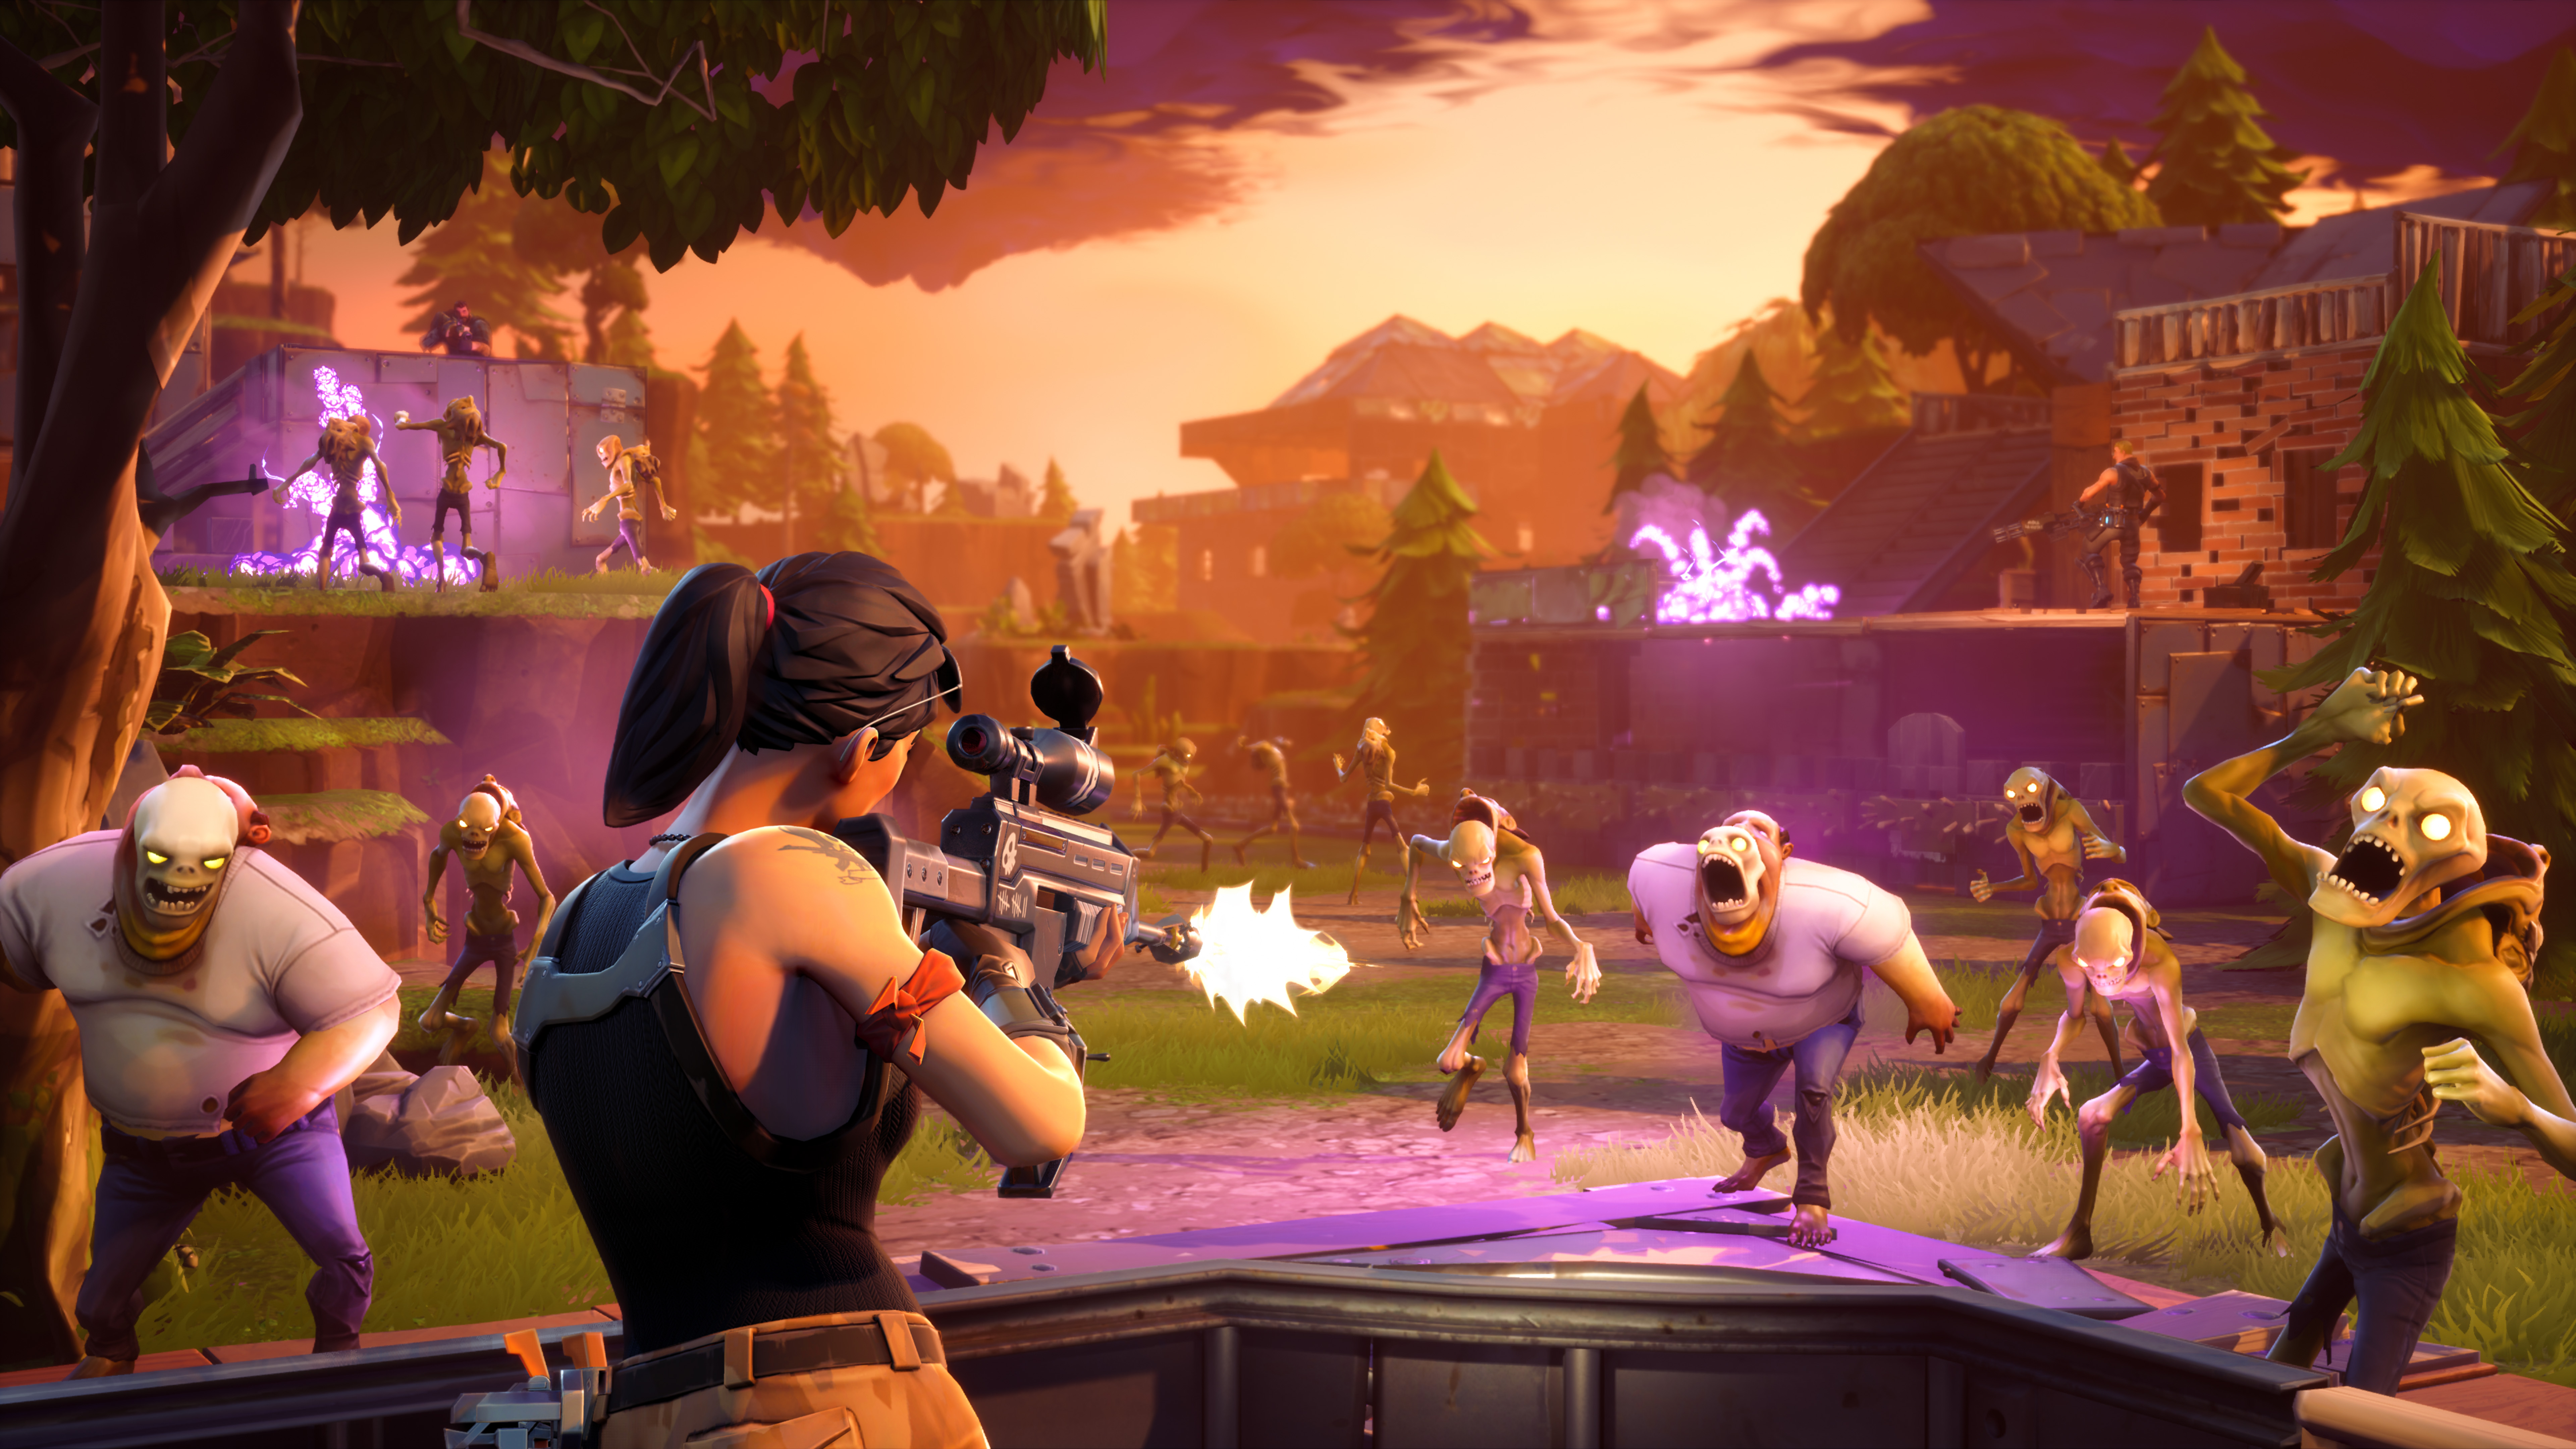 enlarge at its best fortnite looks and feels like this nicely staged promo pic of in game action however so many free to play annoyances drag this - fortnite save the world decks